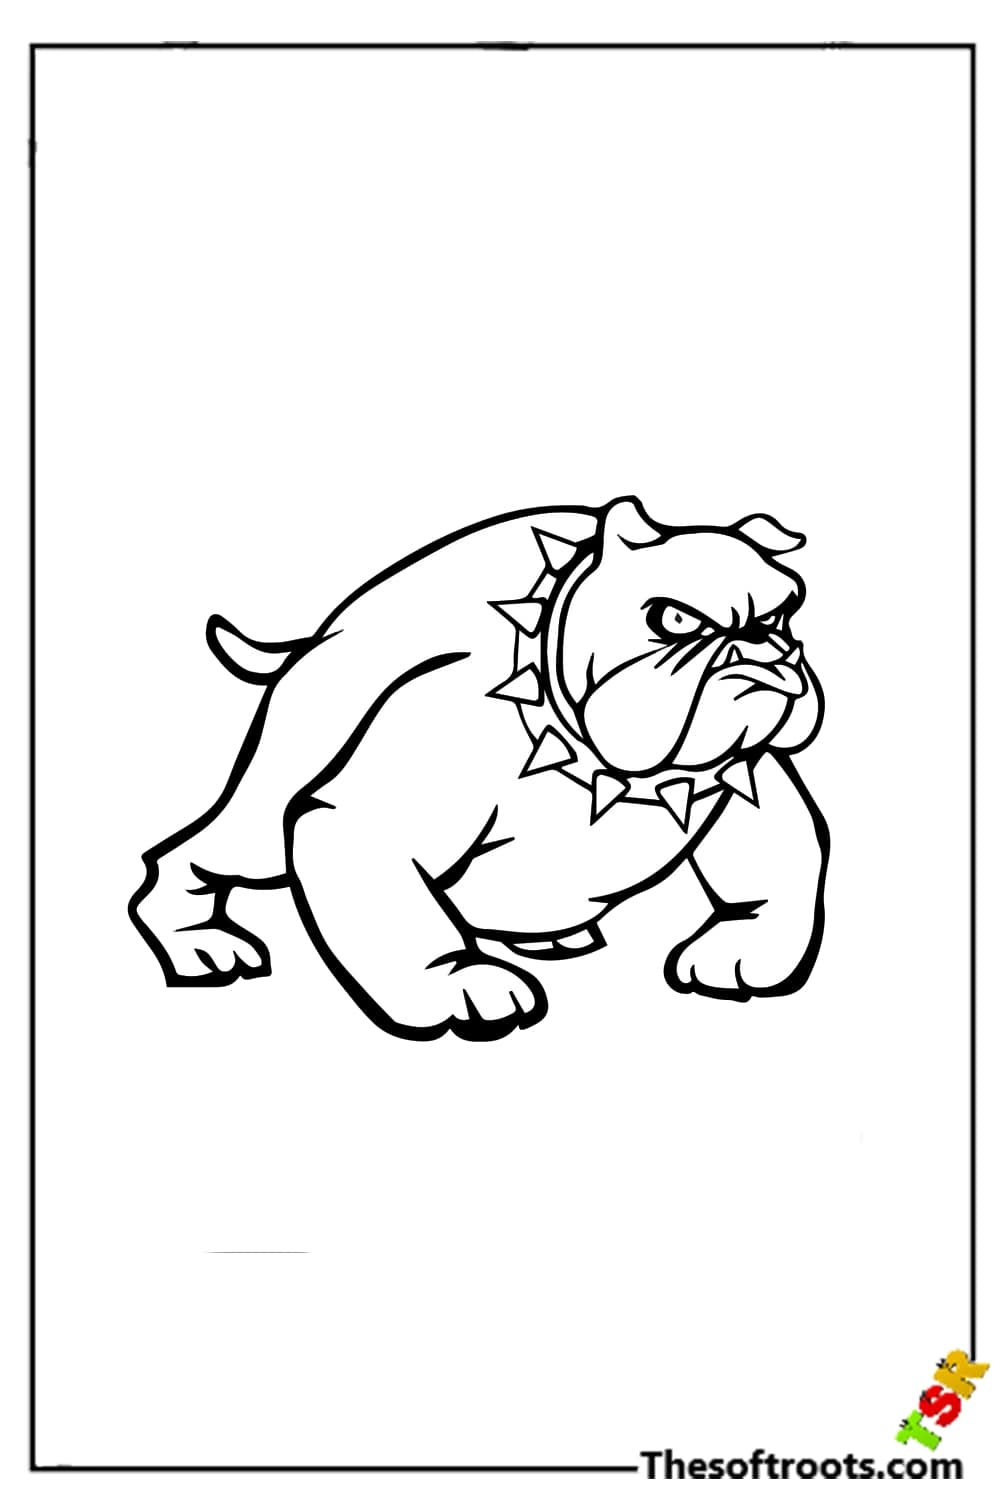 Bull Dog coloring pages